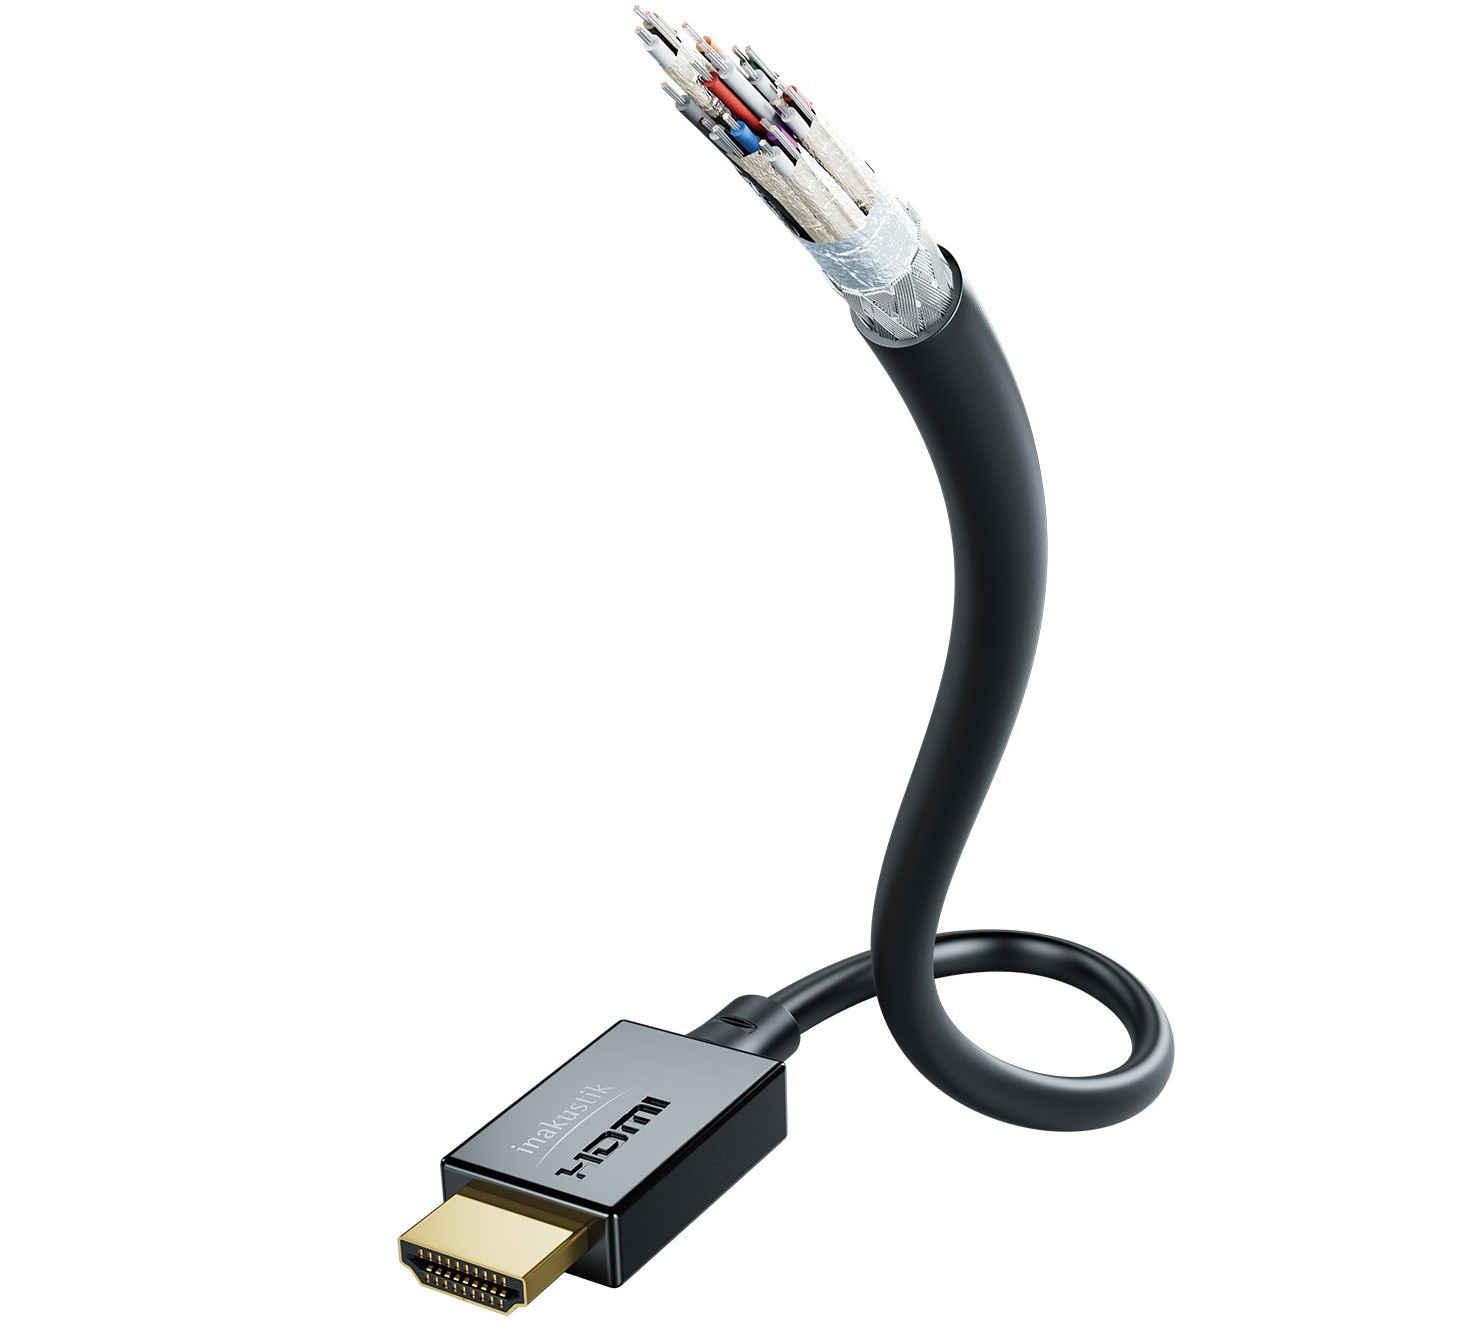 HDMI кабели In-Akustik Star HDMI 2.1, 1.5m #00324615 4k 60hz hdmi splitter 1 in 2 out audio extractor arc spdif rca 2ch 18gbps dolby vision atmos hdr uhd edid setting scaler down